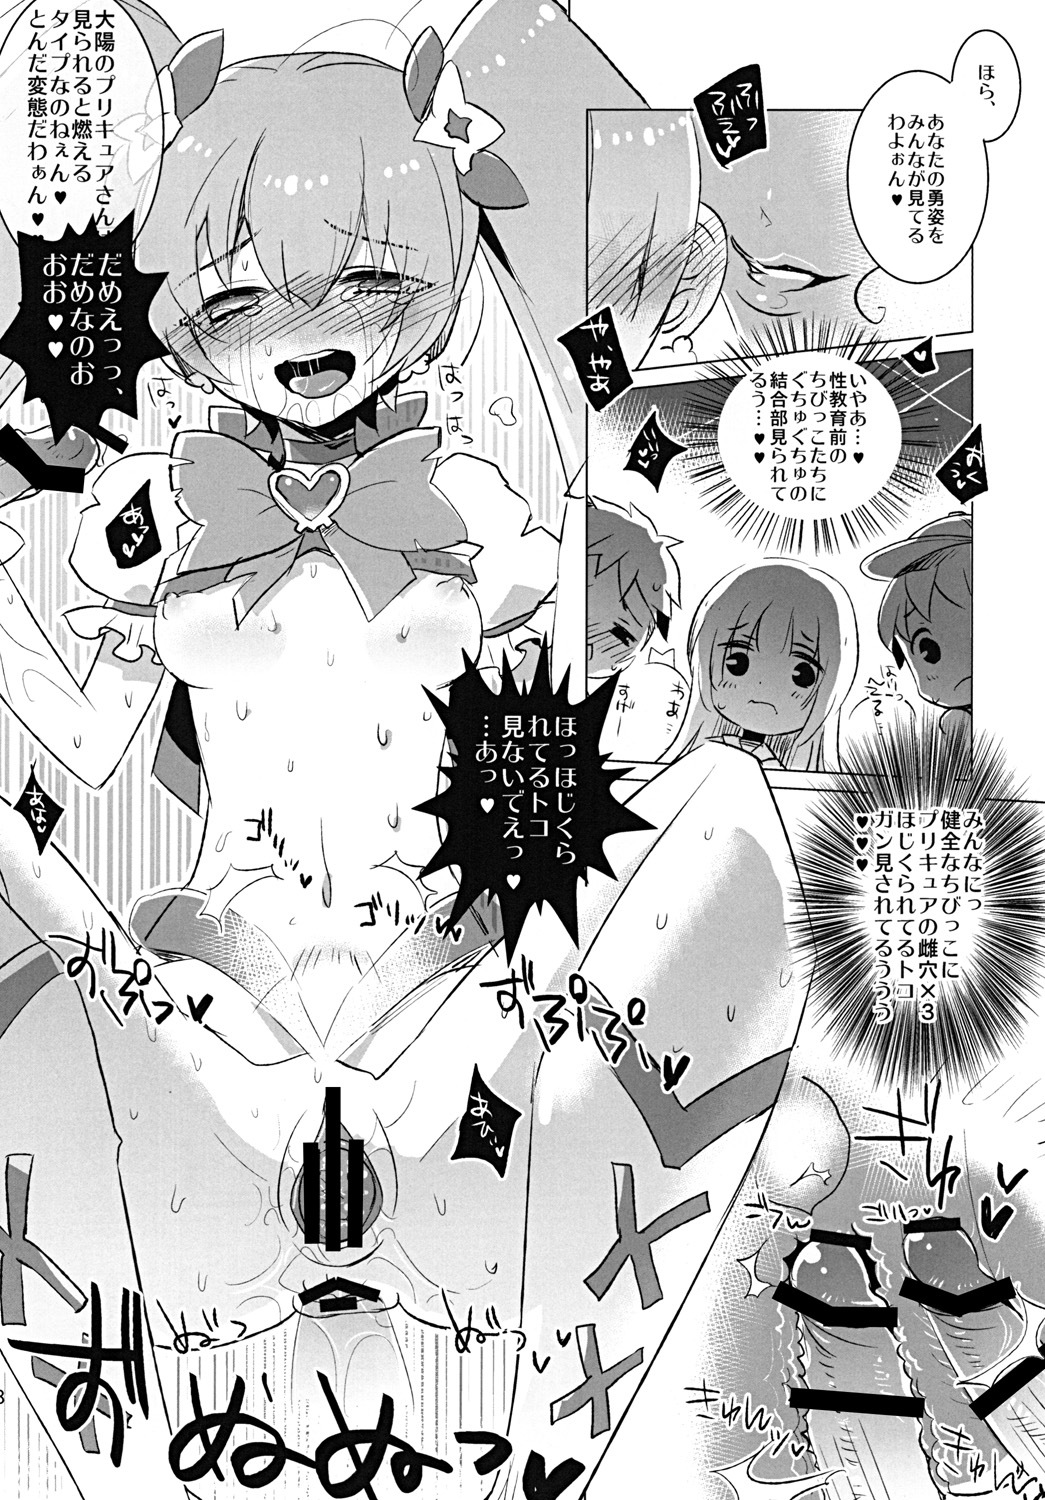 [clear glass (menimo)] Kite Mite Sawatte ☆ (Heart Catch Precure!) page 17 full